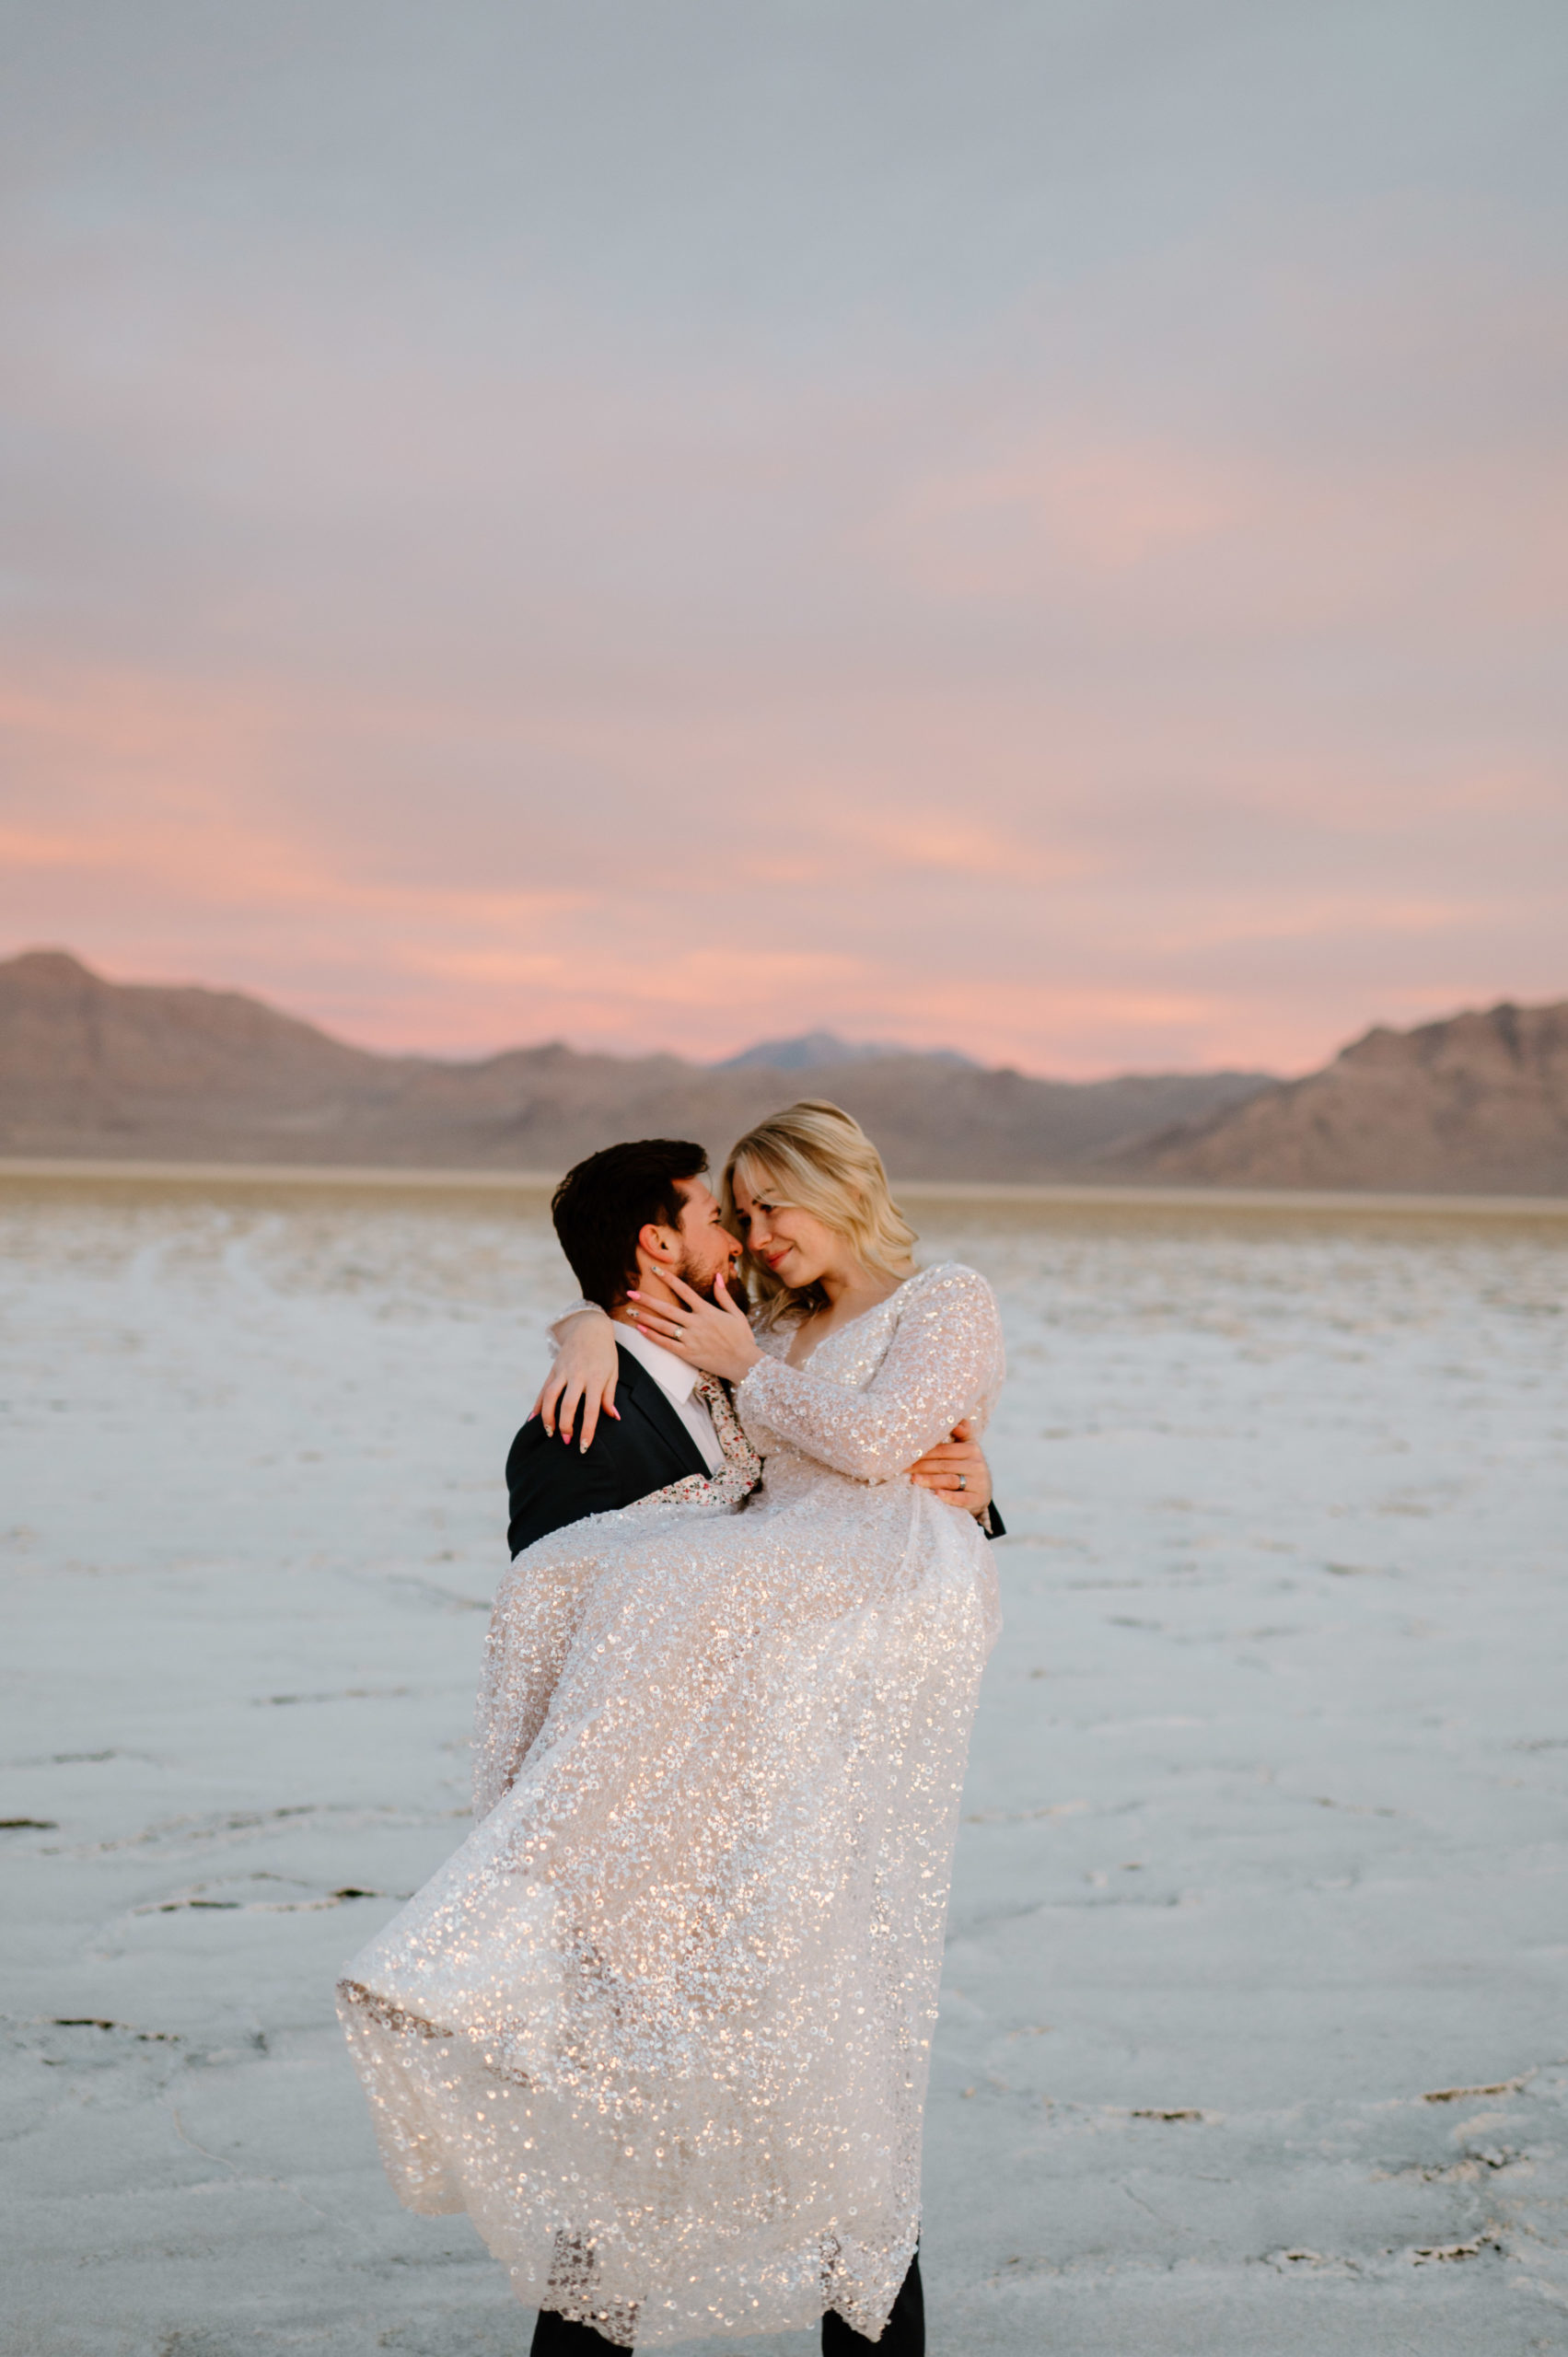 Location is the first step in our ultimate elopement planning guide. 